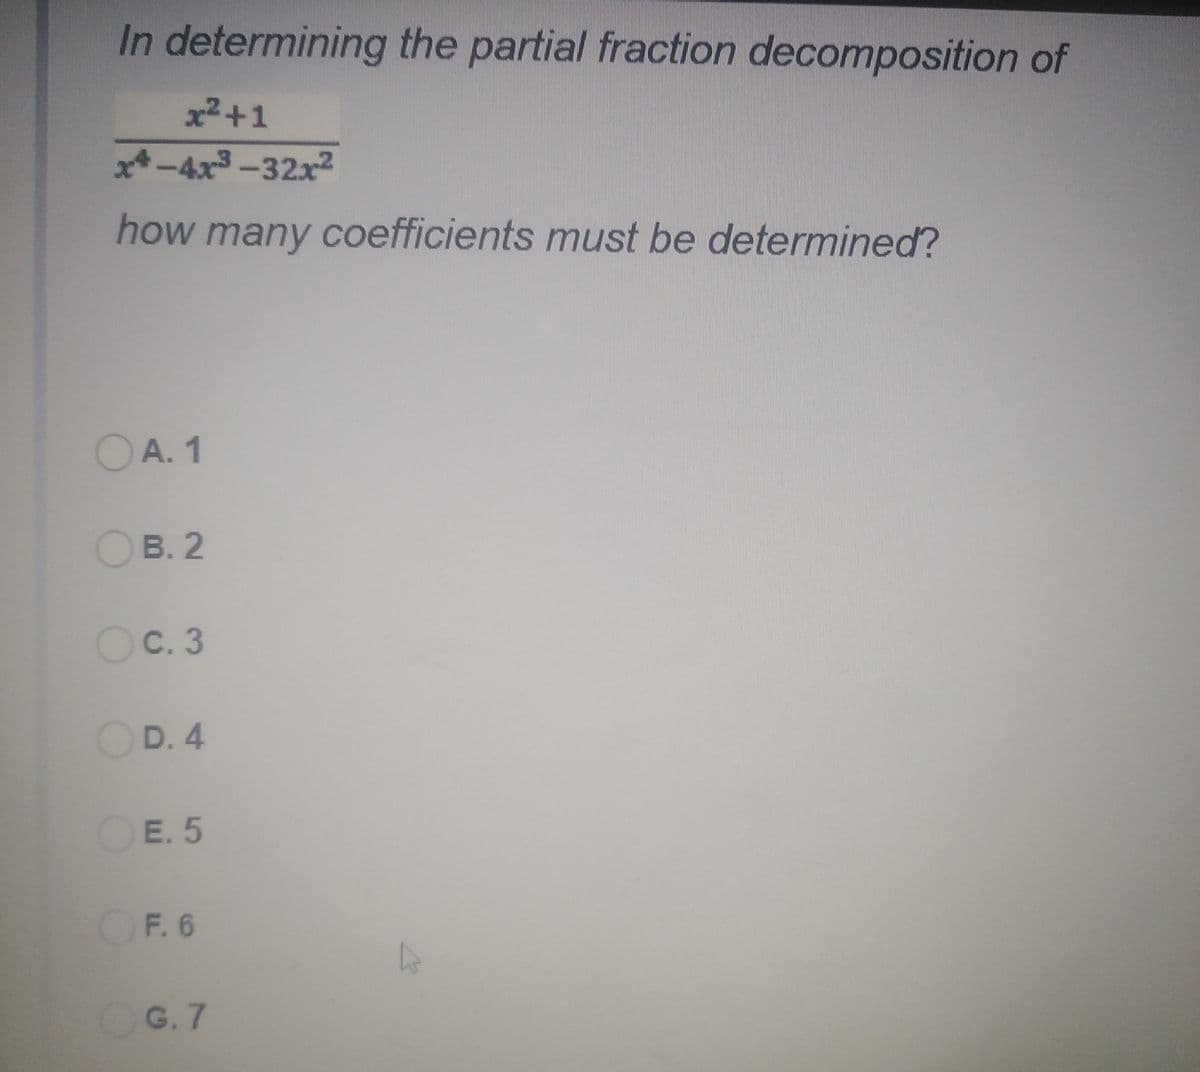 In determining the partial fraction decomposition of
x2+1
x-4x3-32x2
how many coefficients must be determined?
OA. 1
OB. 2
OC.3
OD. 4
OE. 5
OF. 6
OG. 7
